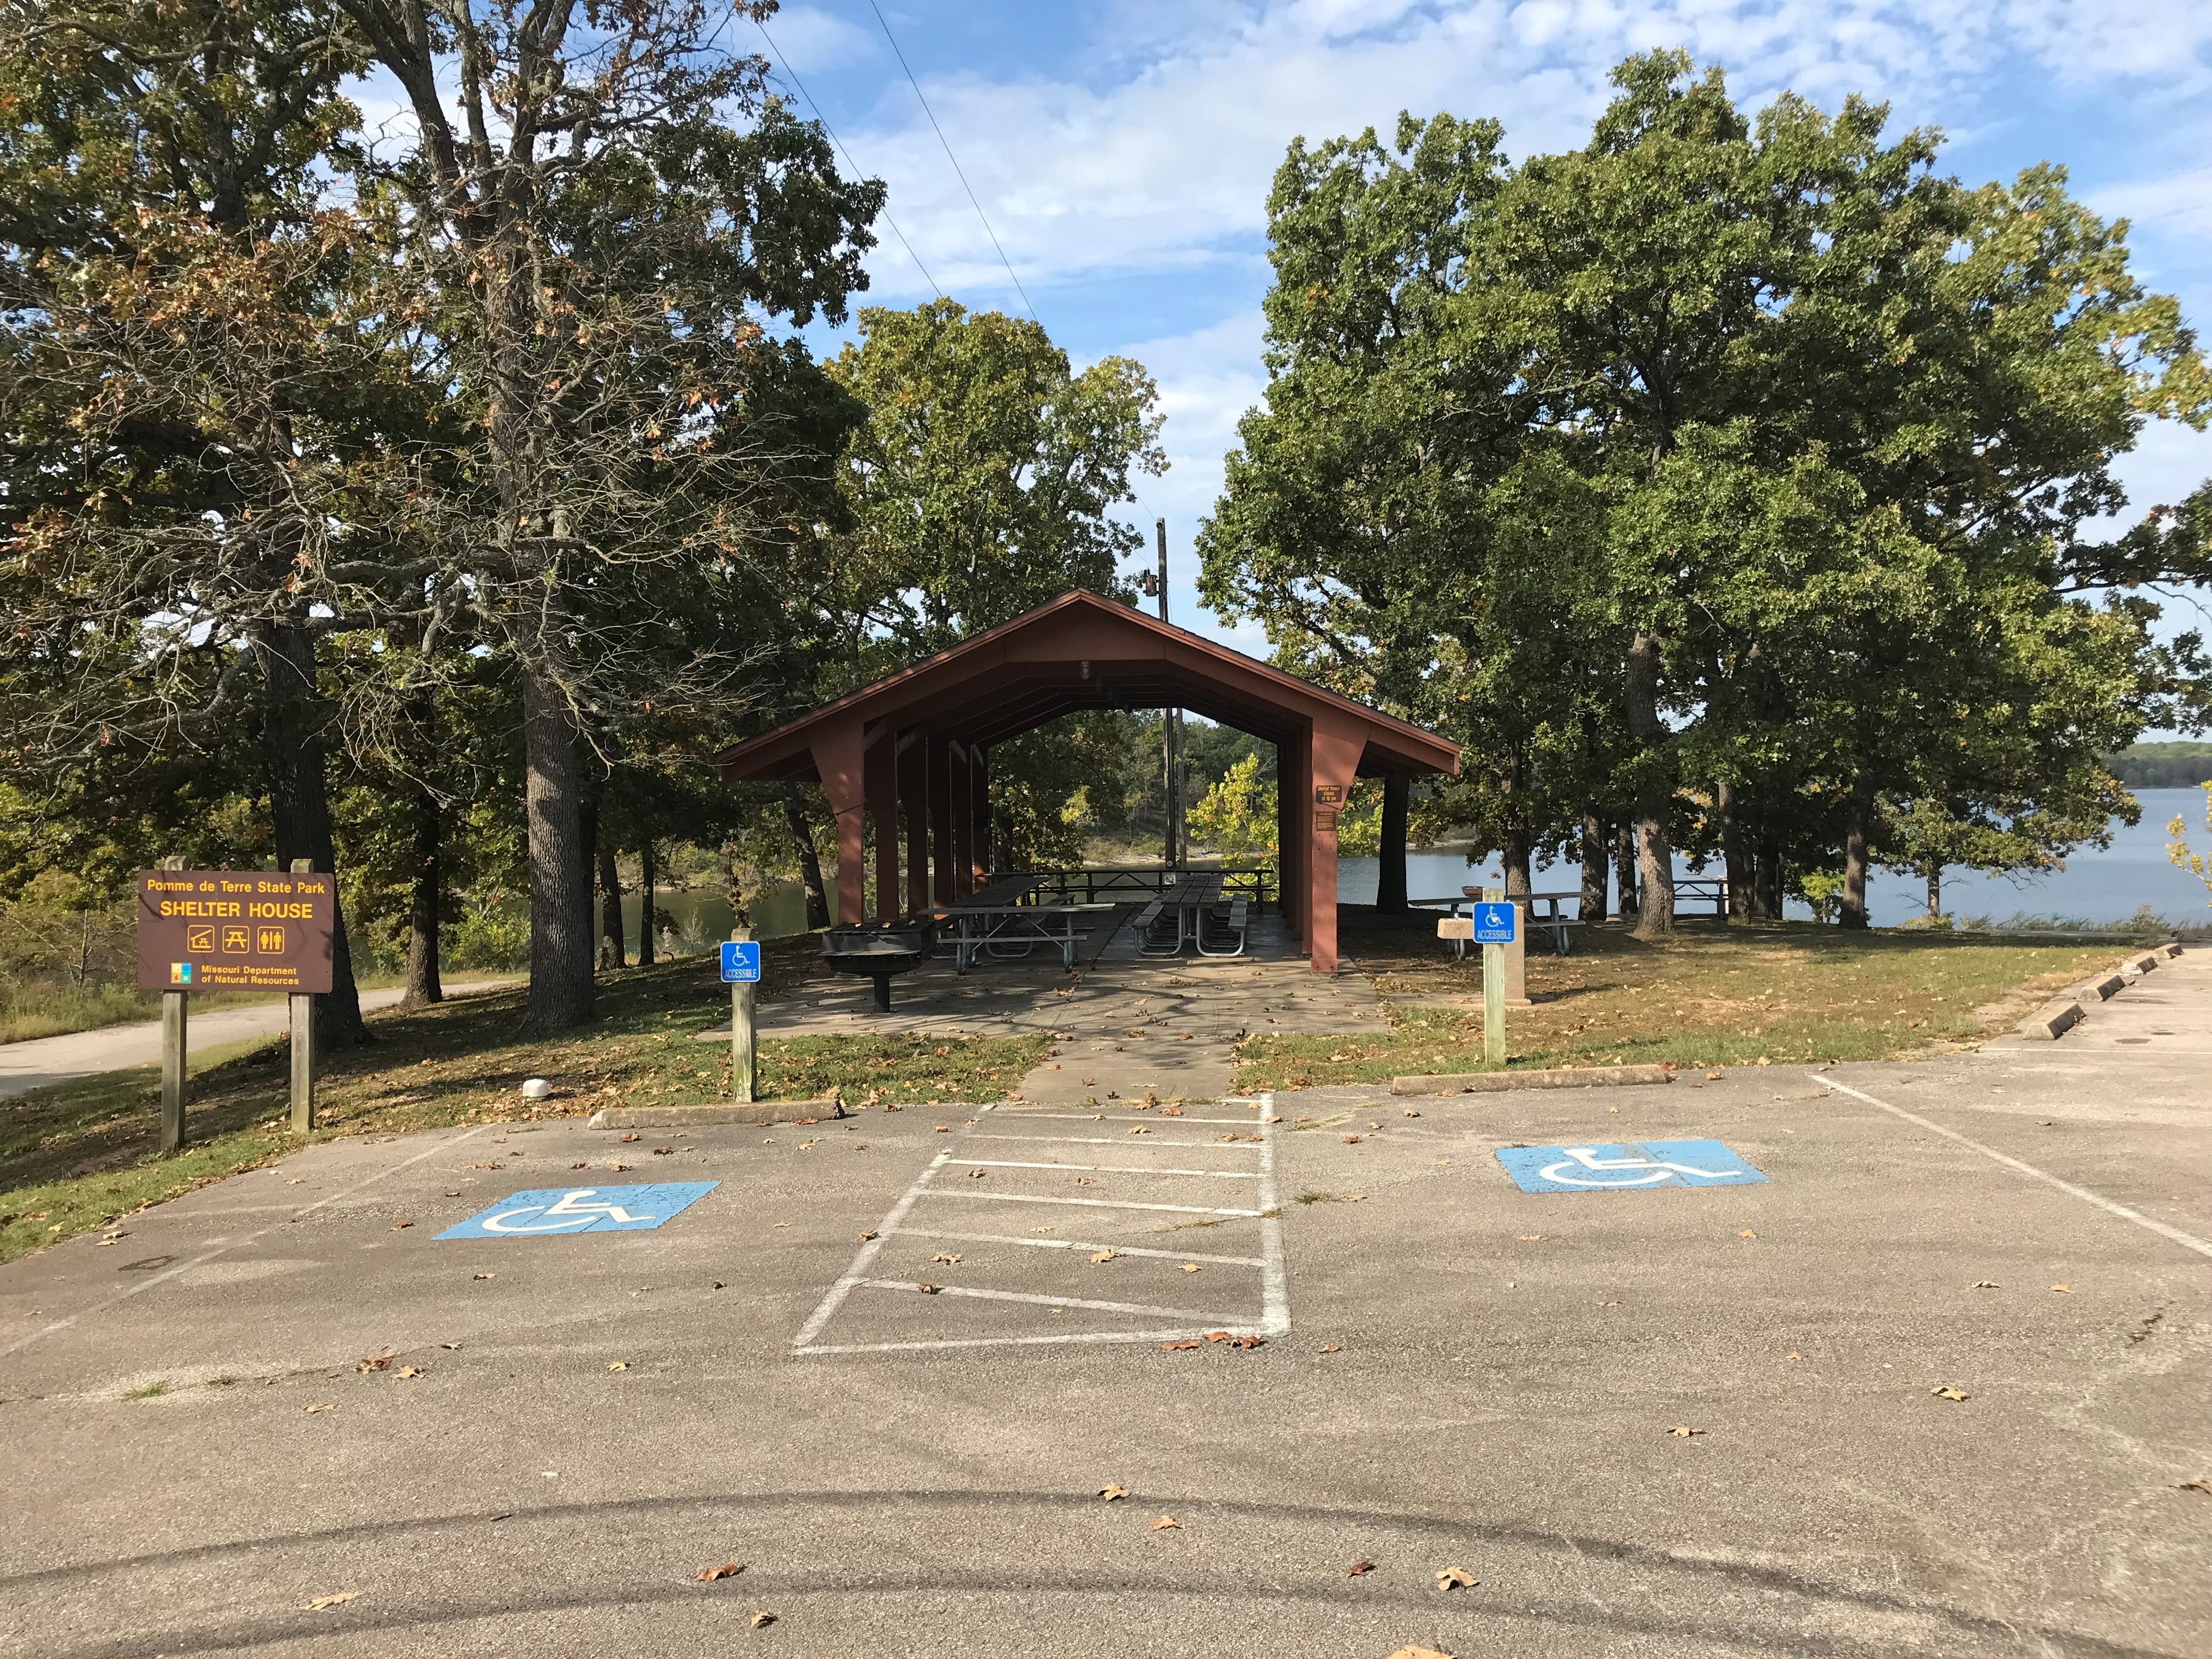 Open picnic shelter in front of lake with accessible parking spaces and shelter sign in foreground